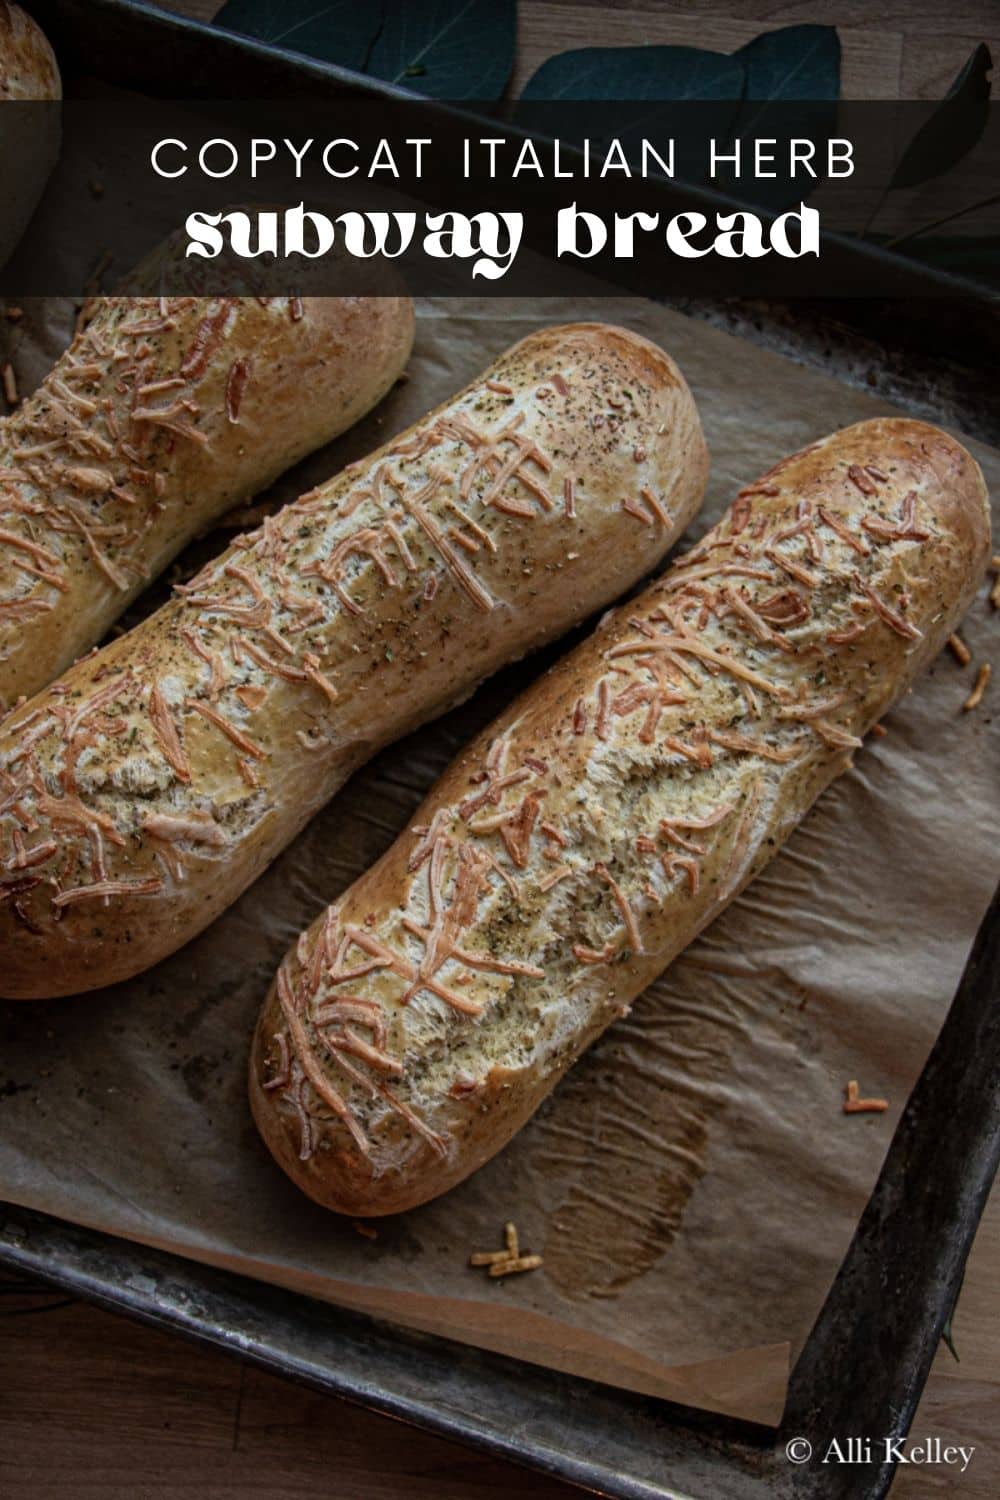 With its flavorful combination of herbs and cheese, my Italian Subway bread recipe is the perfect base for any sandwich! With this recipe, you can have the same deliciousness of Subway-style sandwiches without ever having to leave the house. With its soft texture and irresistible aroma, my Subway Italian herb and cheese bread will make your lunchtime a real treat!